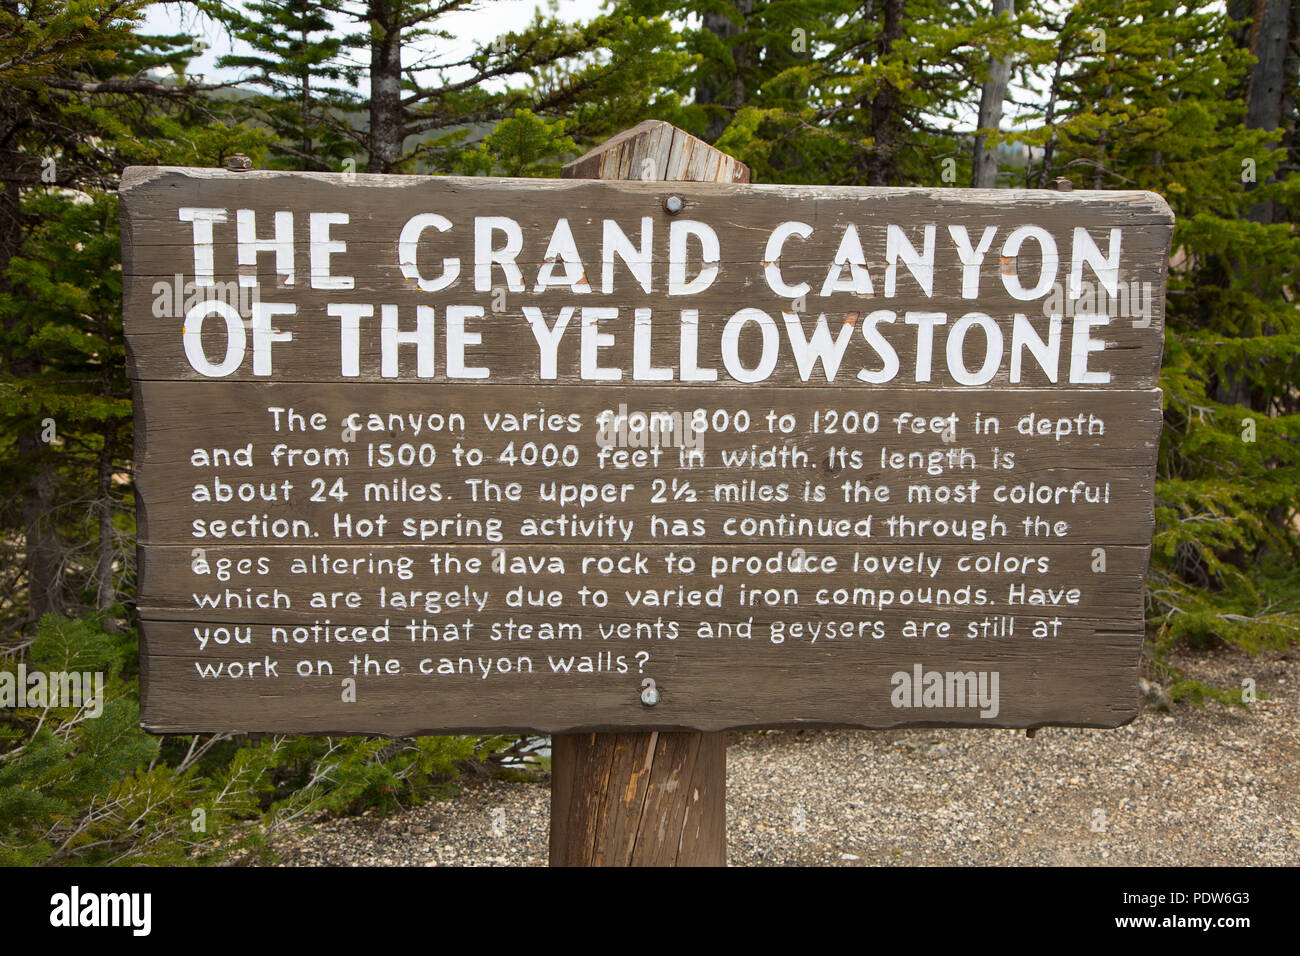 Grand Canyon of the Yellowstone sign, Yellowstone National Park, Wyoming Stock Photo